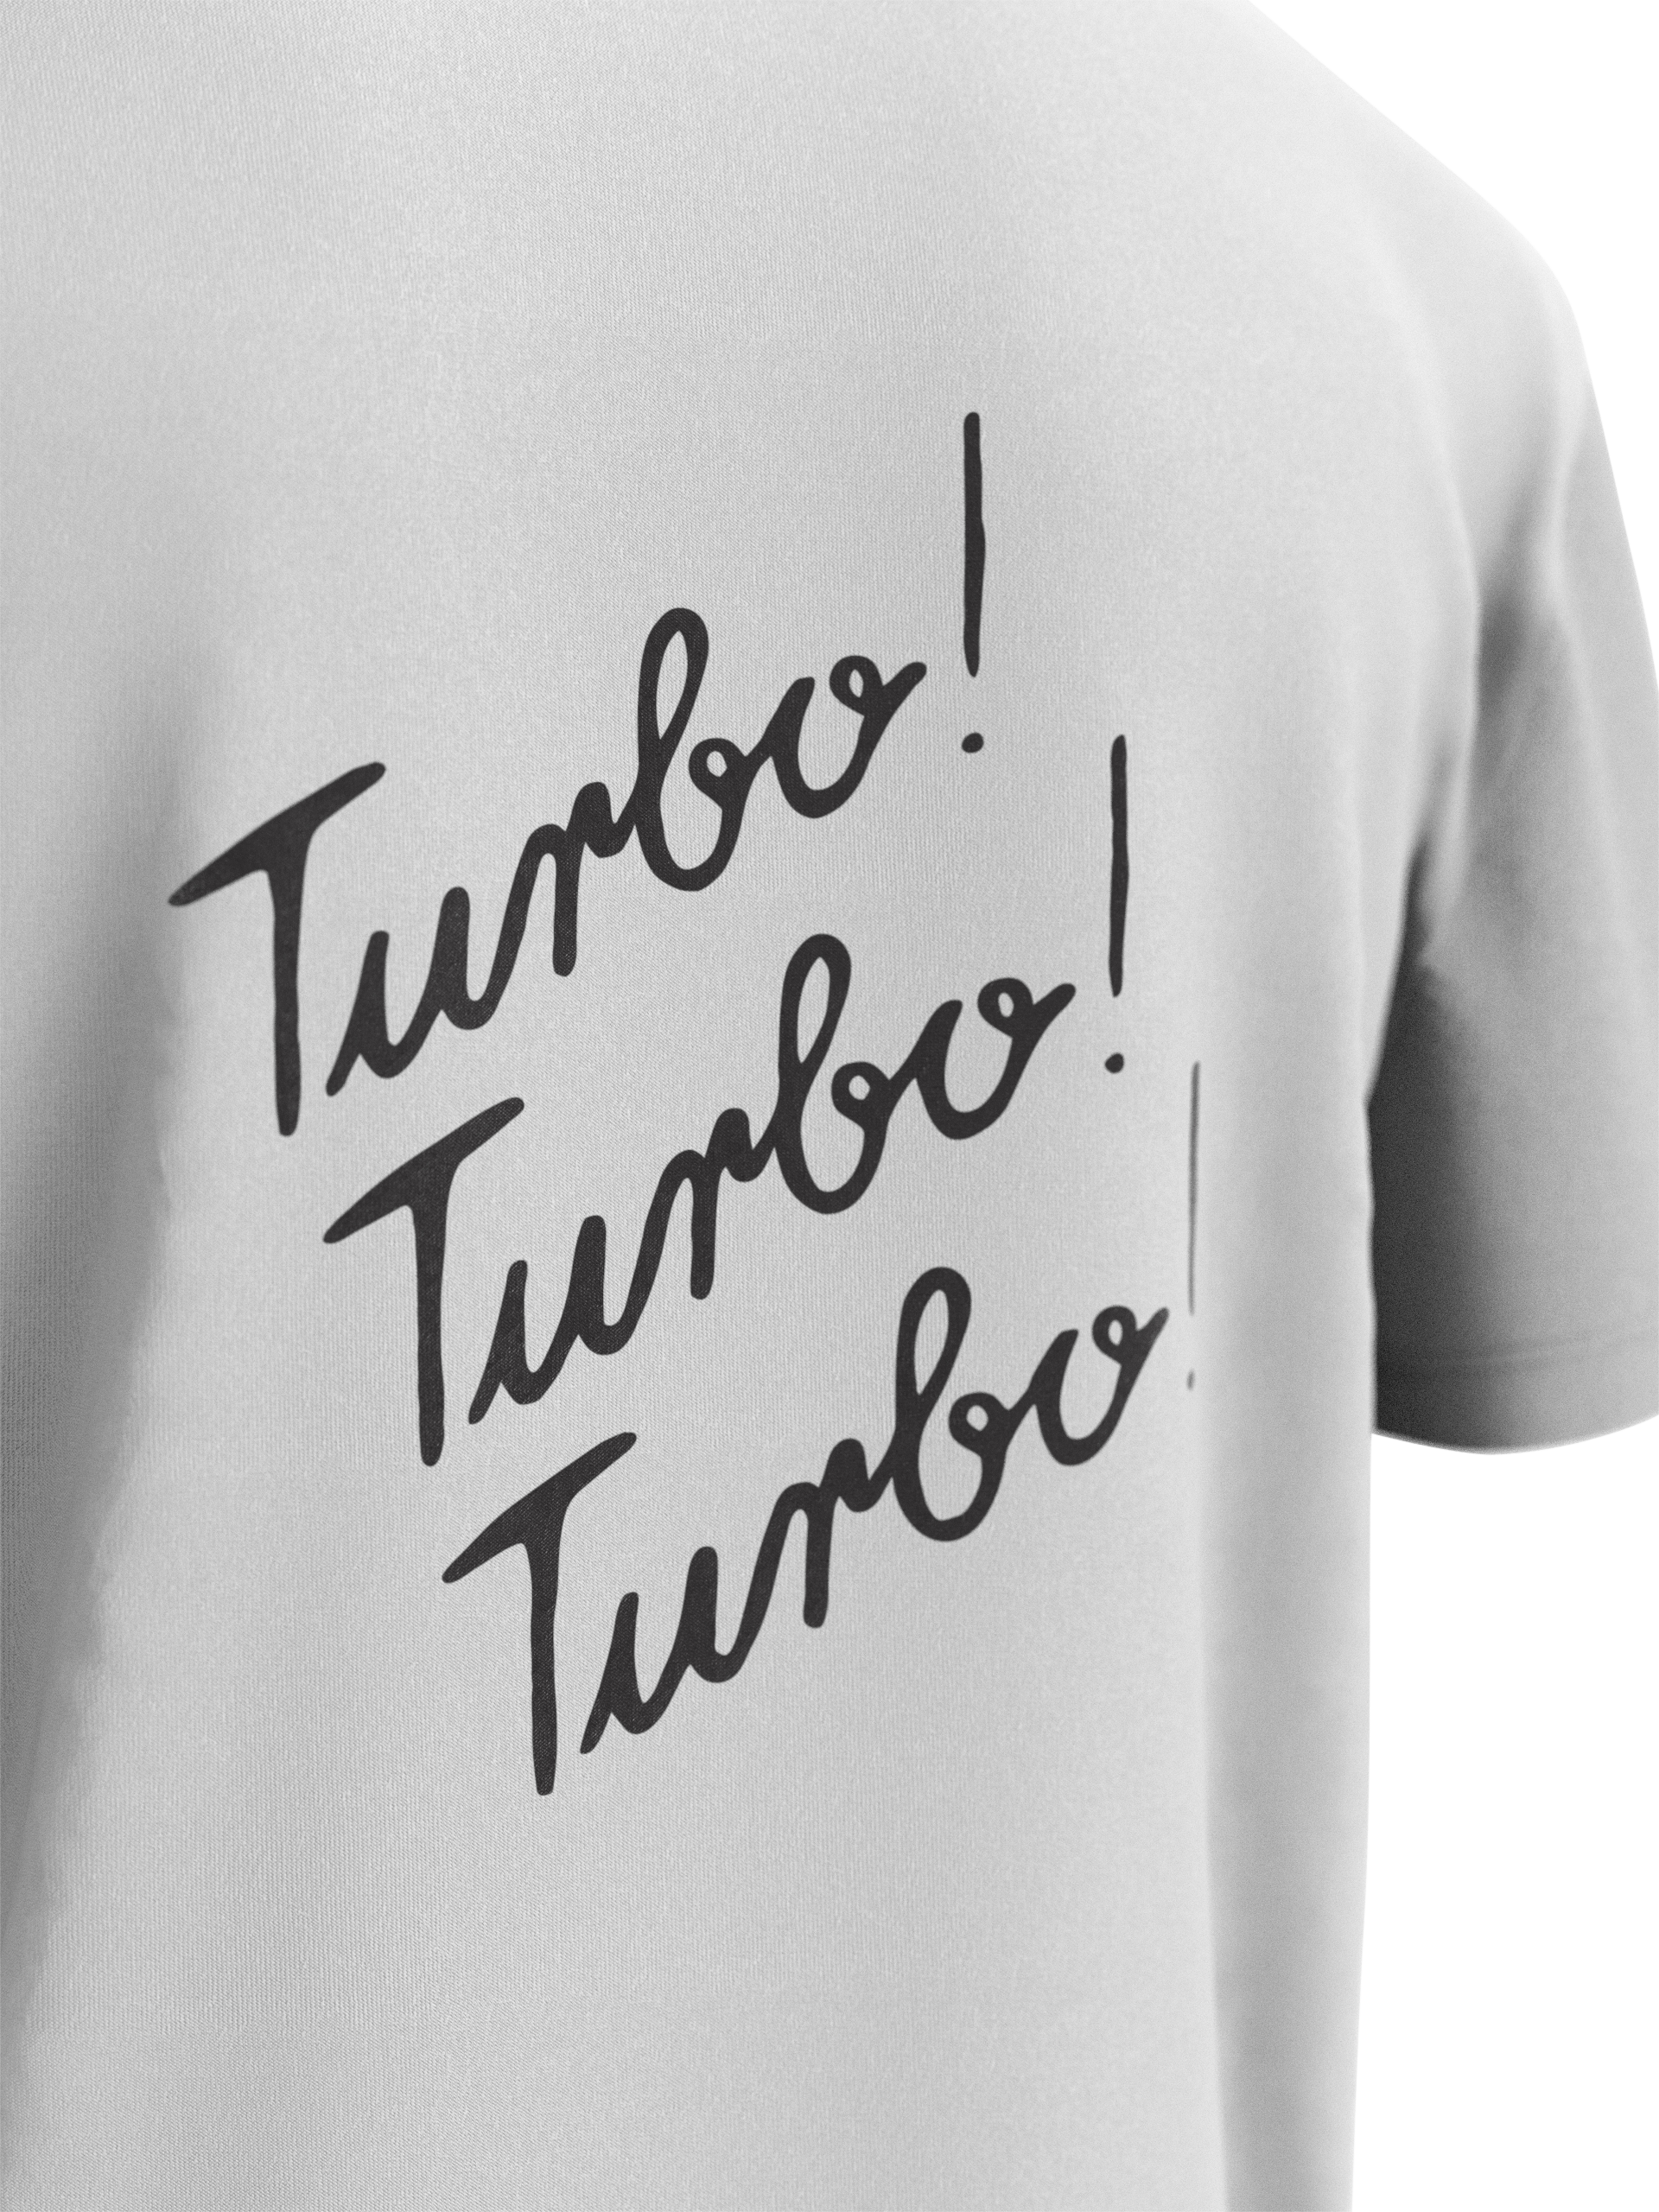 Lobster Turbo T 2019 - 2020 product image by Lobster Snowboards